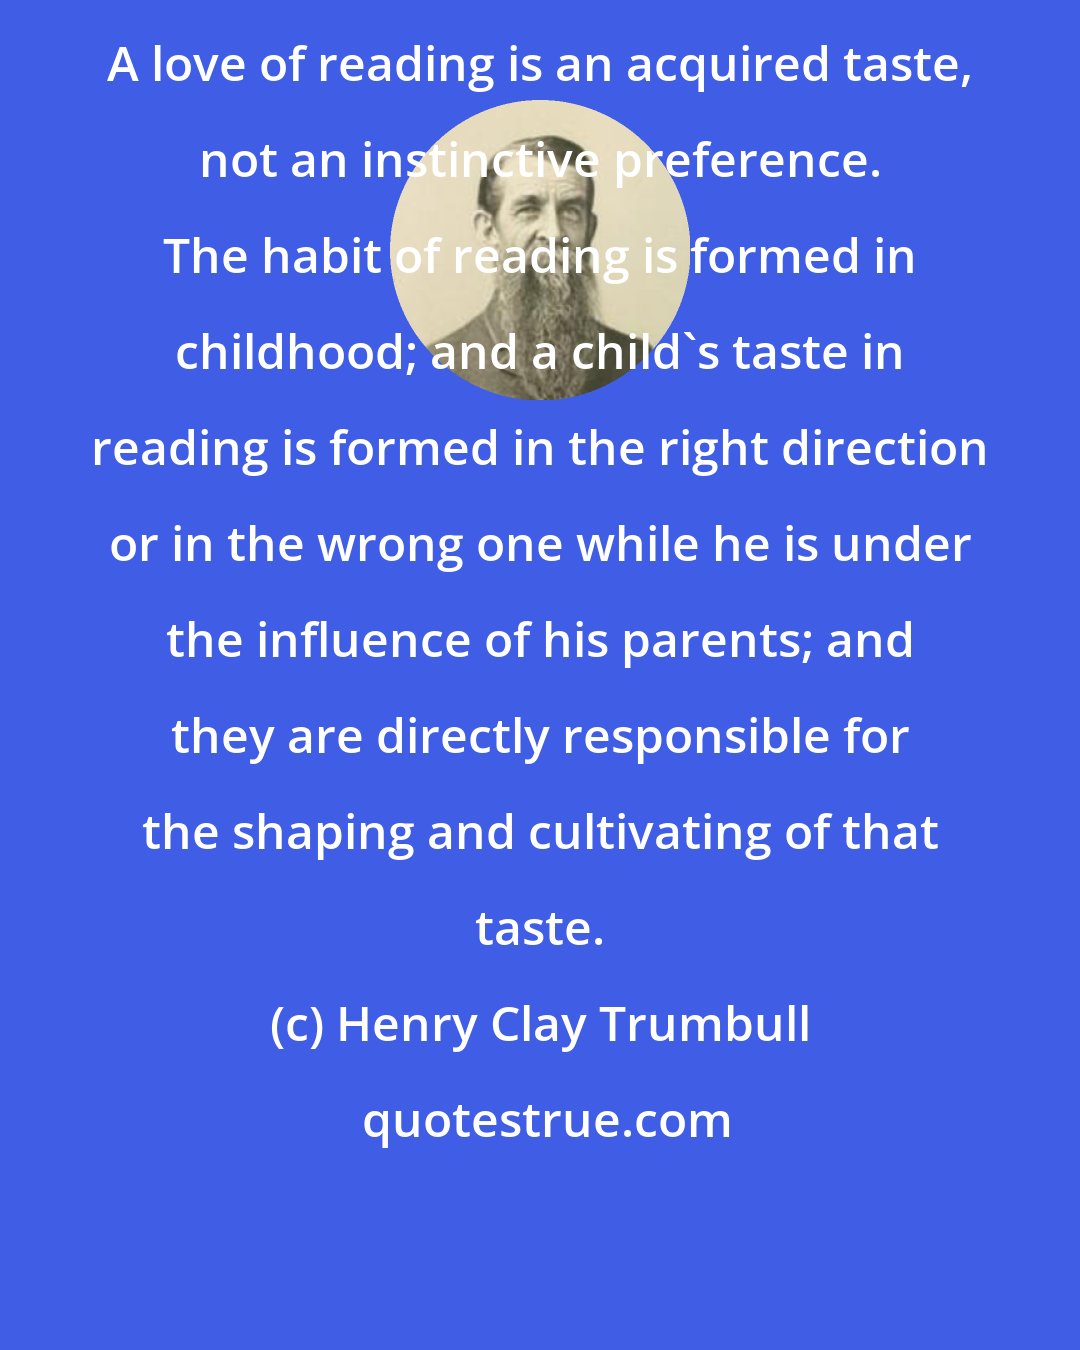 Henry Clay Trumbull: A love of reading is an acquired taste, not an instinctive preference. The habit of reading is formed in childhood; and a child's taste in reading is formed in the right direction or in the wrong one while he is under the influence of his parents; and they are directly responsible for the shaping and cultivating of that taste.